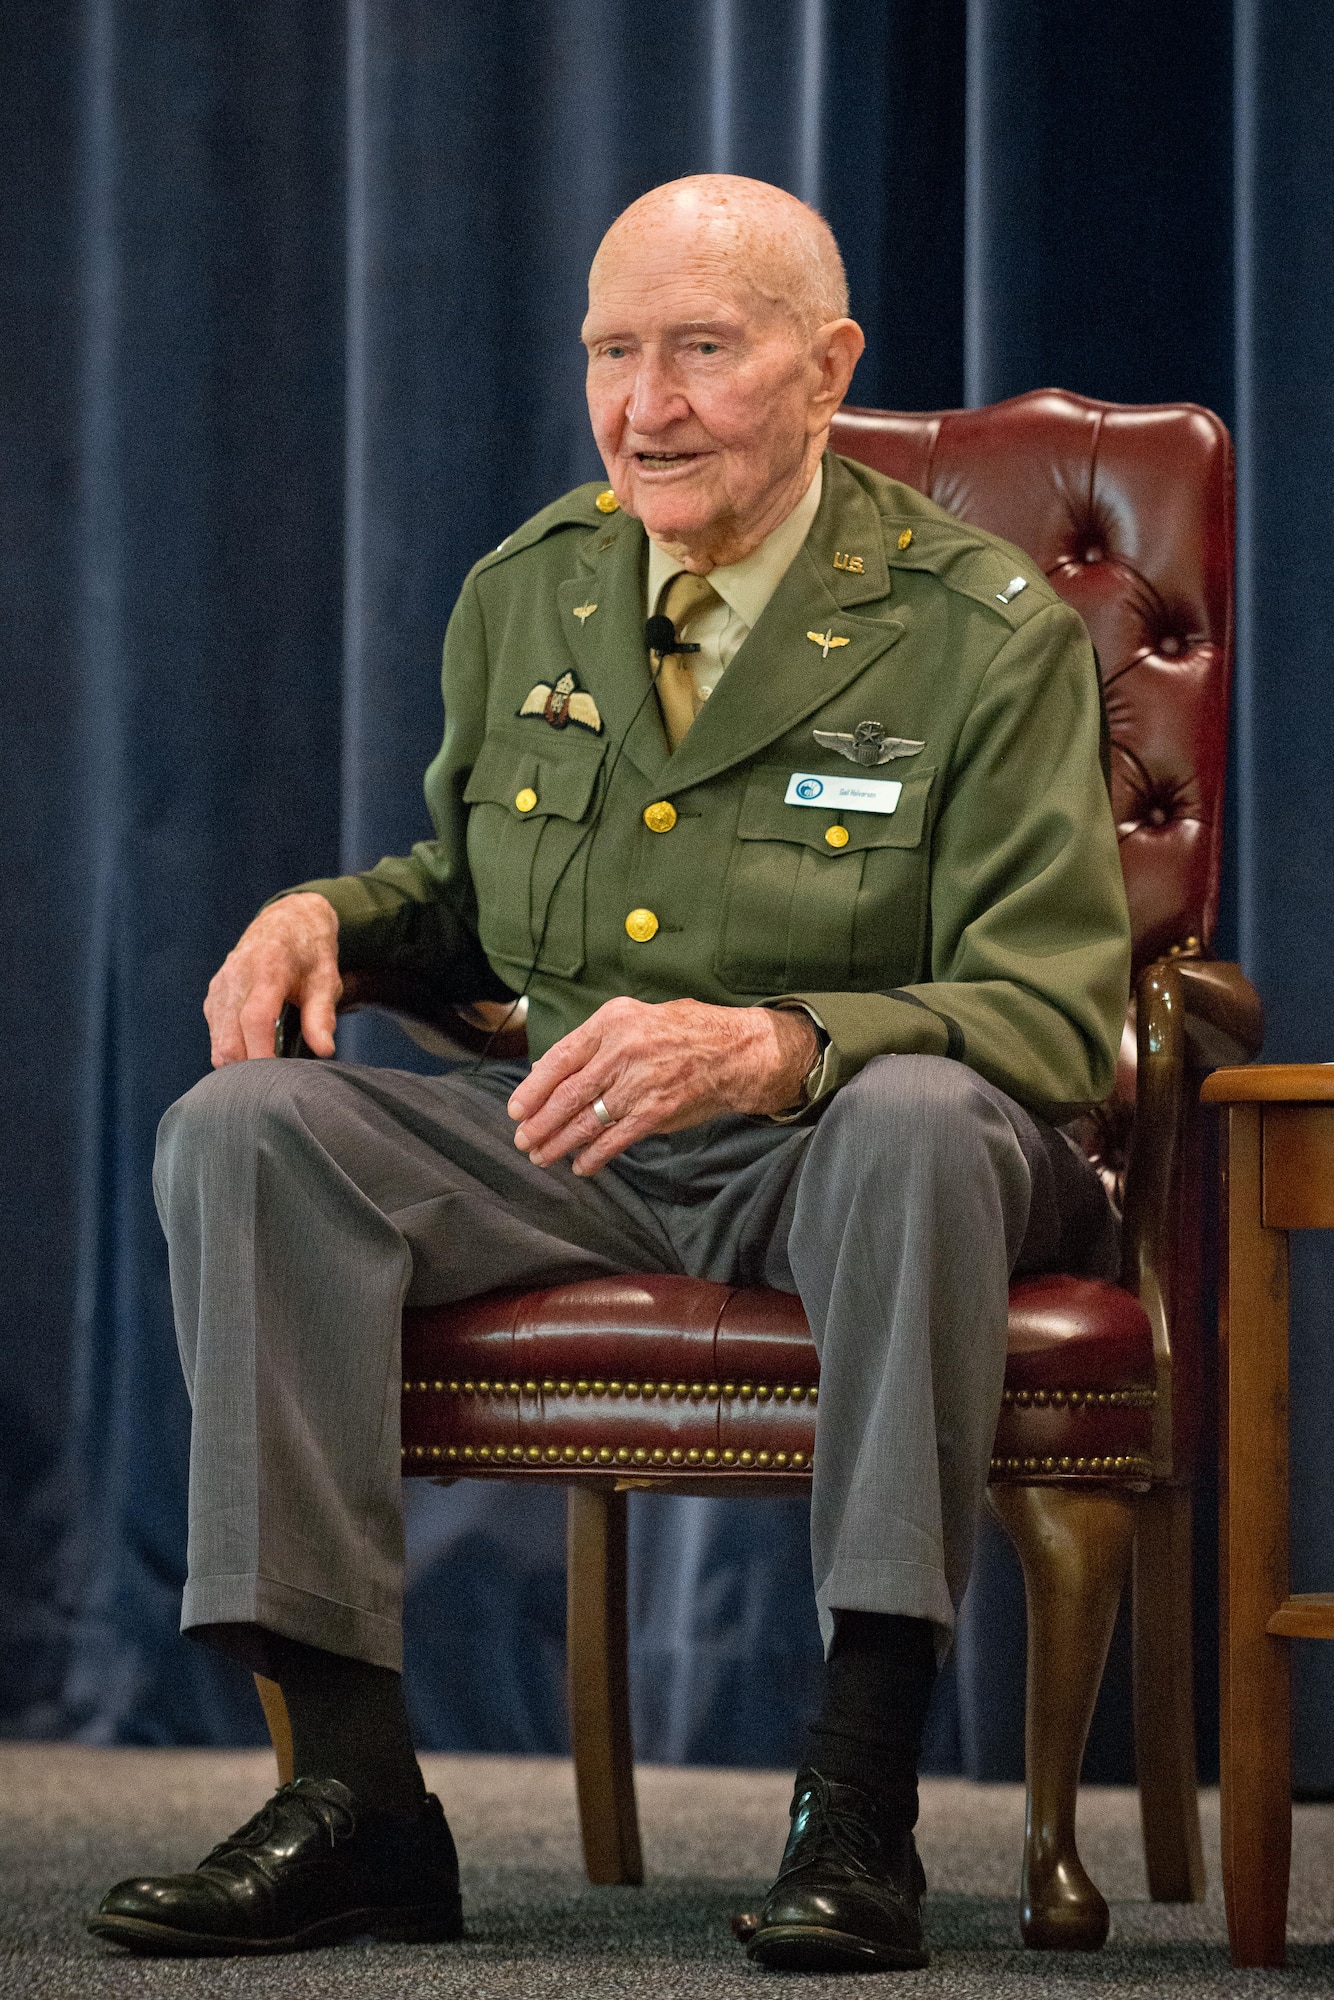 Retired Col. Gail S. Halvorsen, 2016 Gathering of Eagles honoree, discusses his experiences while serving during the Berlin Airlift, during the Air Command and Staff College’s 2016 Gathering of Eagles event, May 31, 2016, Maxwell Air Force Base, Alabama. Halvorsen is most famous as the Candy Bomber for dropping candy to the children of Berlin. (U.S. Air Force photo/ Donna Burnett)